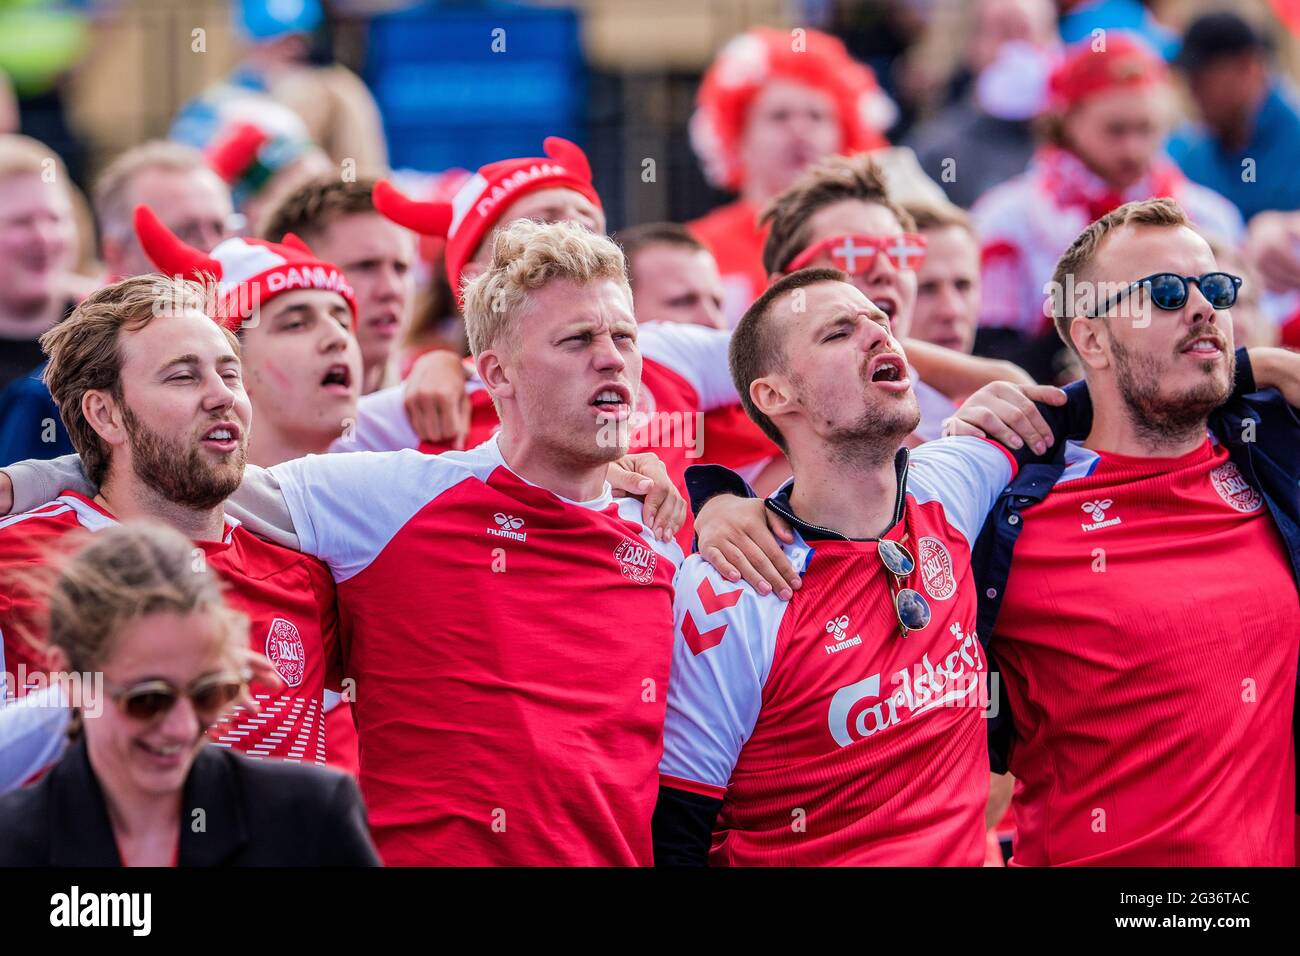 Copenhagen, Denmark. 12th June, 2021. Danish football fans dressed with fan  gear in red and white warm up for the UEFA EURO 2020 match between Denmark  and Finland in Copenhagen. (NB: The